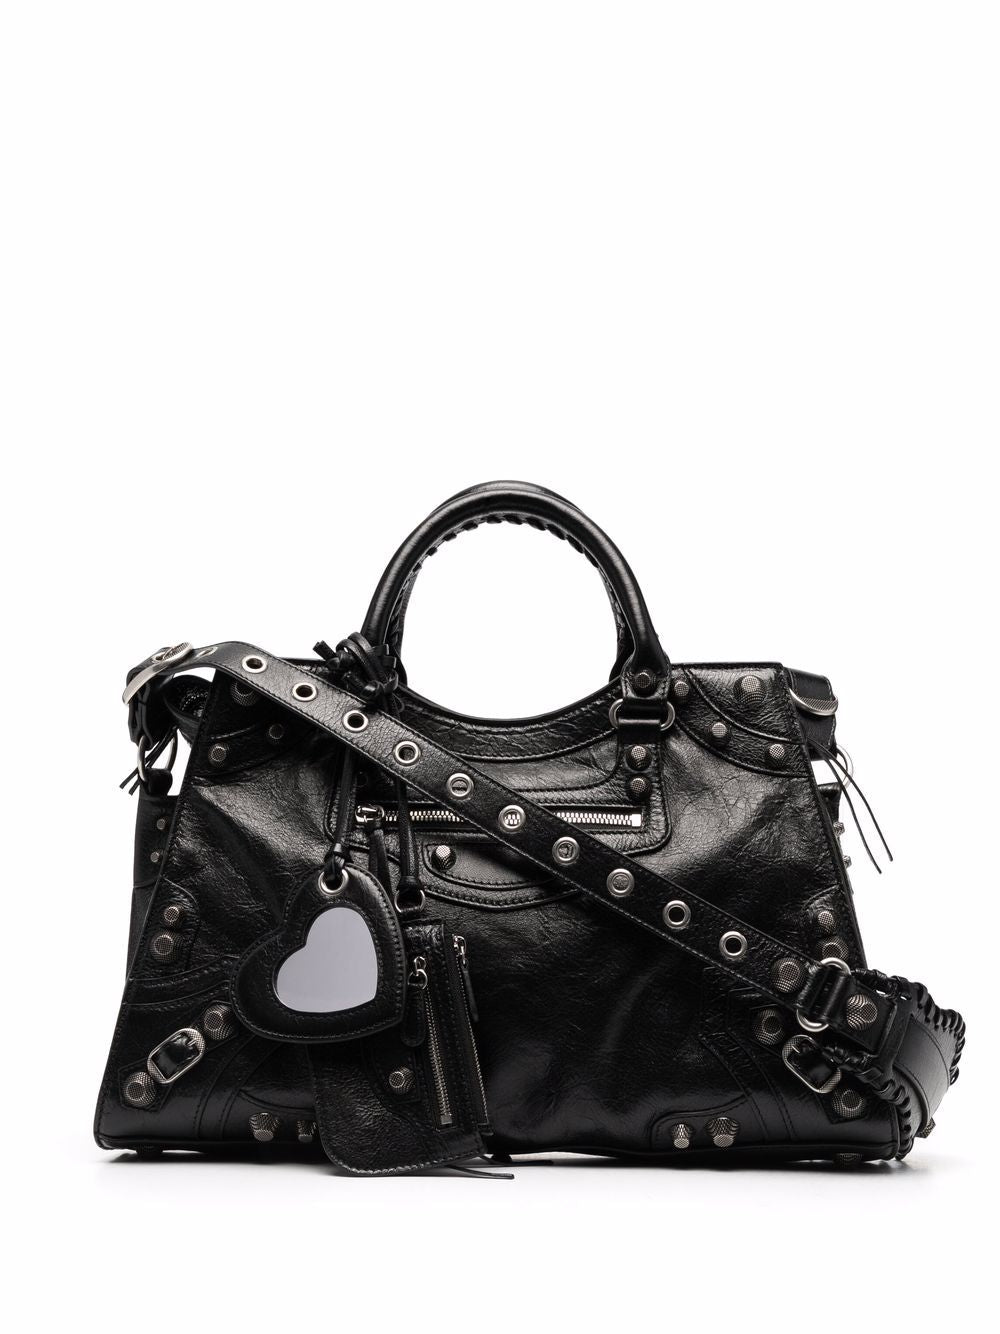 BALENCIAGA Hand-Braided Black Leather Shoulder Bag with Zip Closures and Detachable Mirror for Women